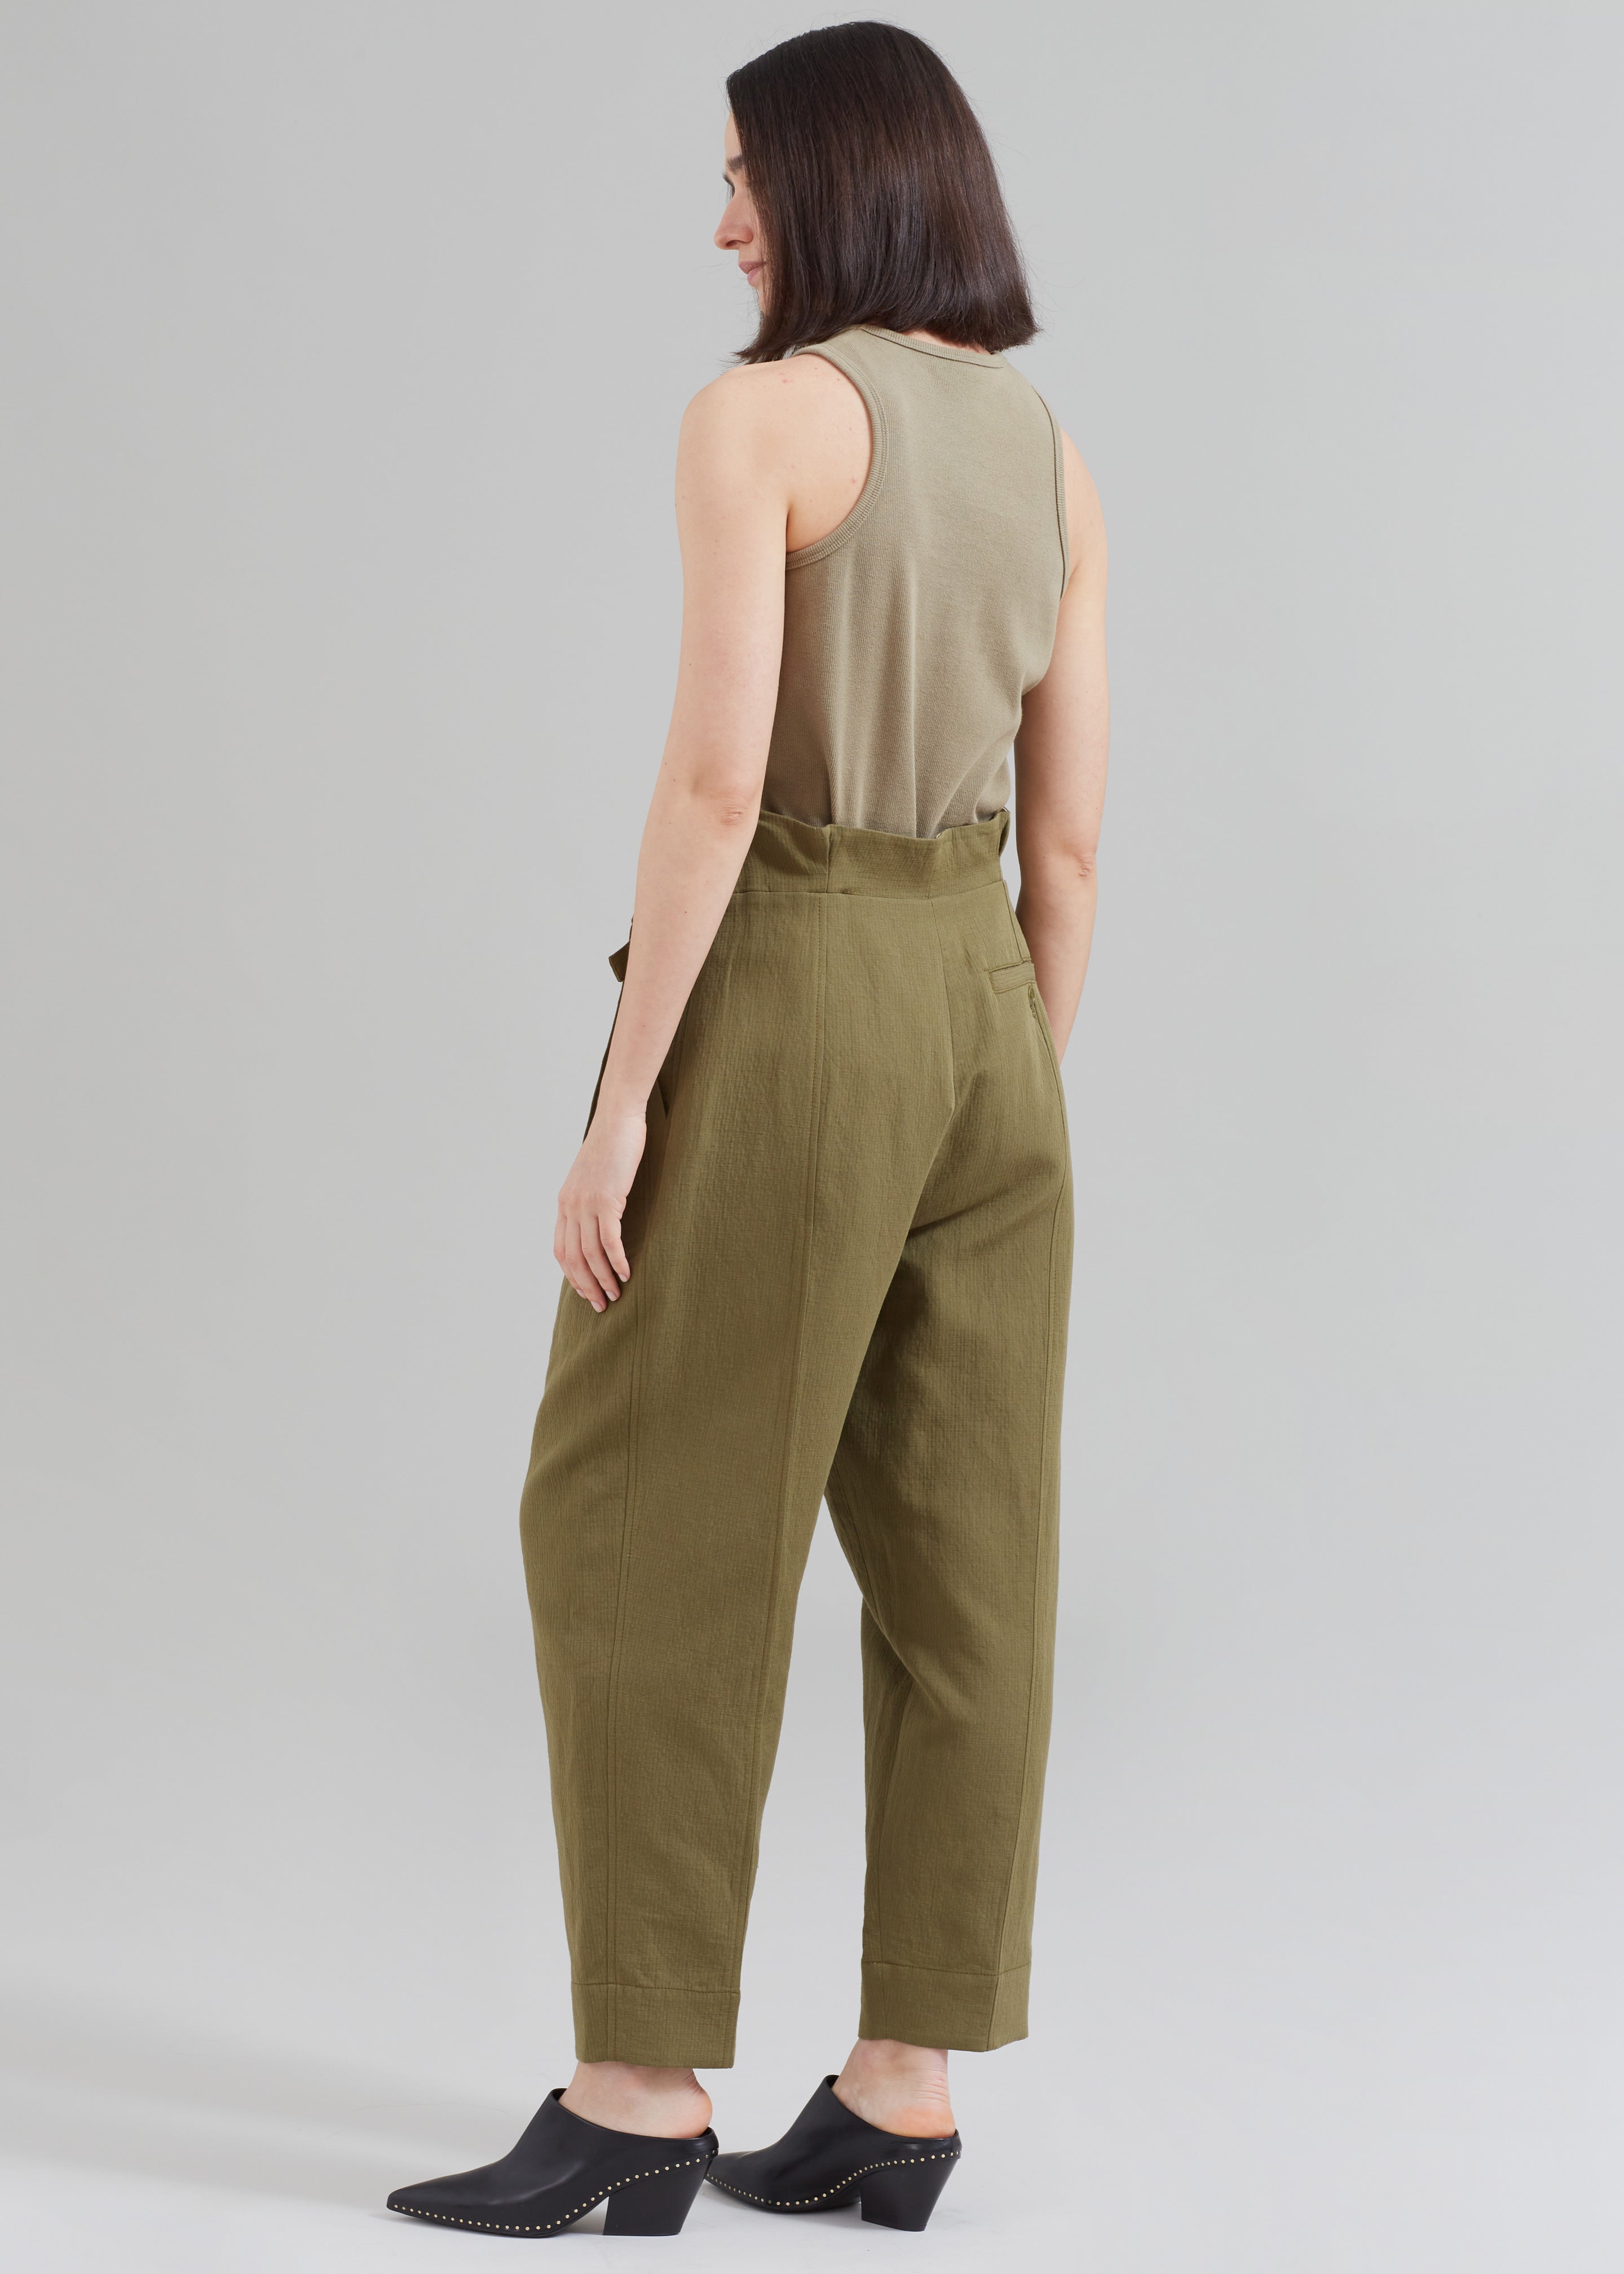 Womens Ladies High Paperbag Waist Pants Crop Linen Pull On Trousers Size  10-20 | eBay